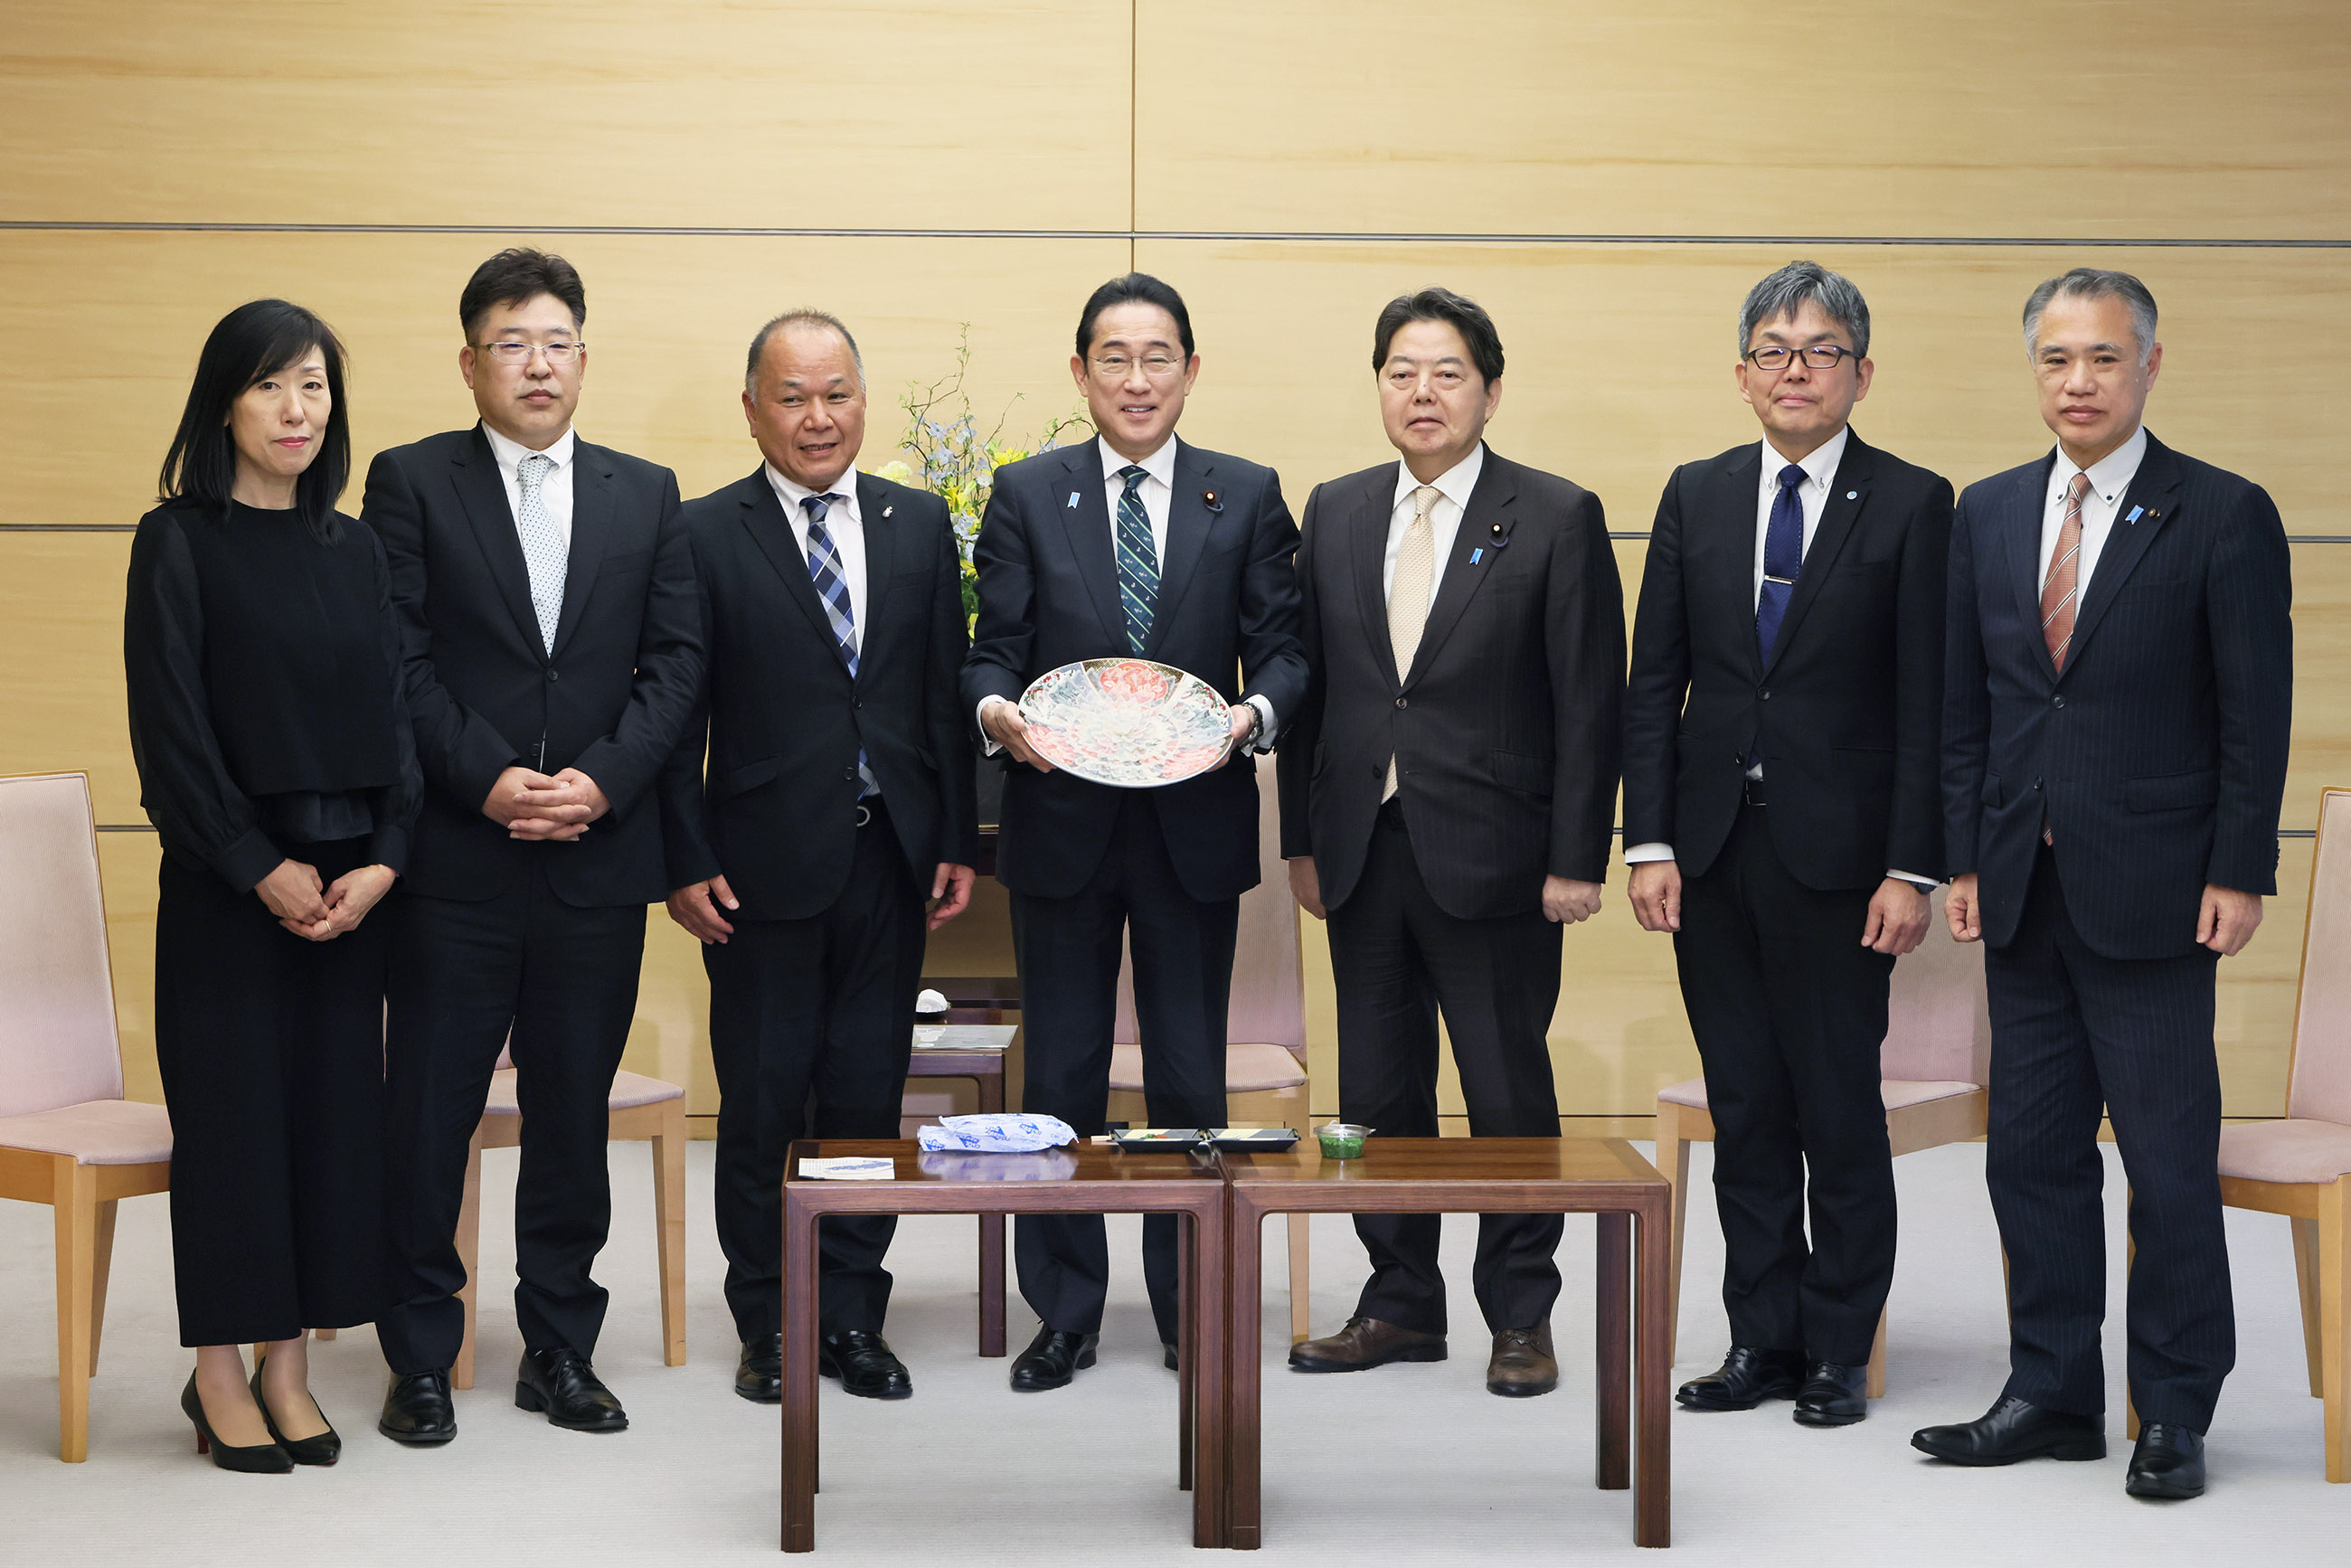 Courtesy Call from the Shimonoseki Fuku Federation and Others